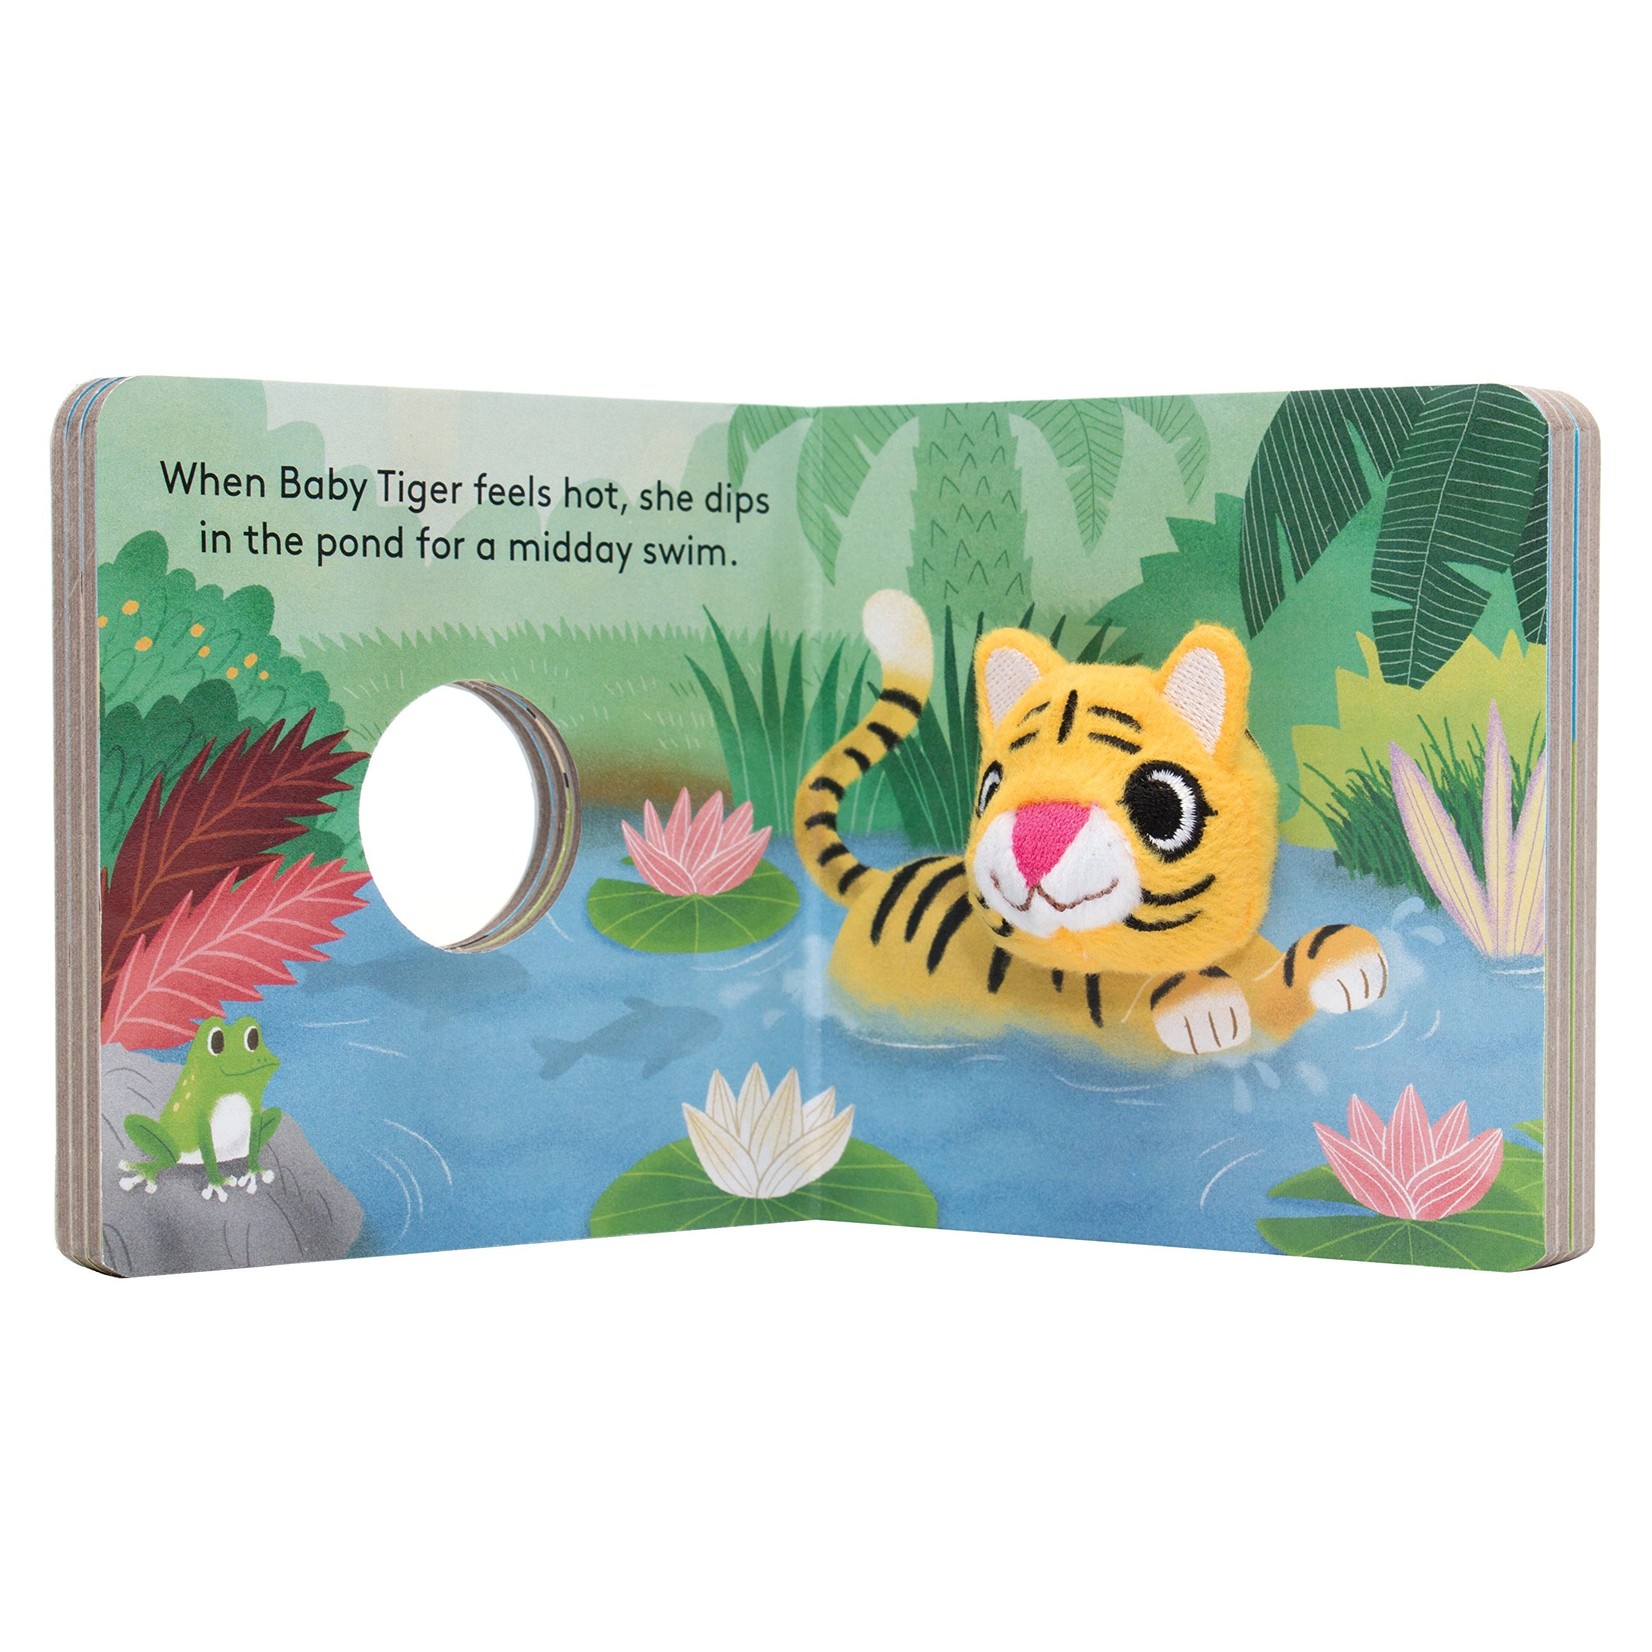 Chronicle Books Baby Tiger : Finger Puppet Book